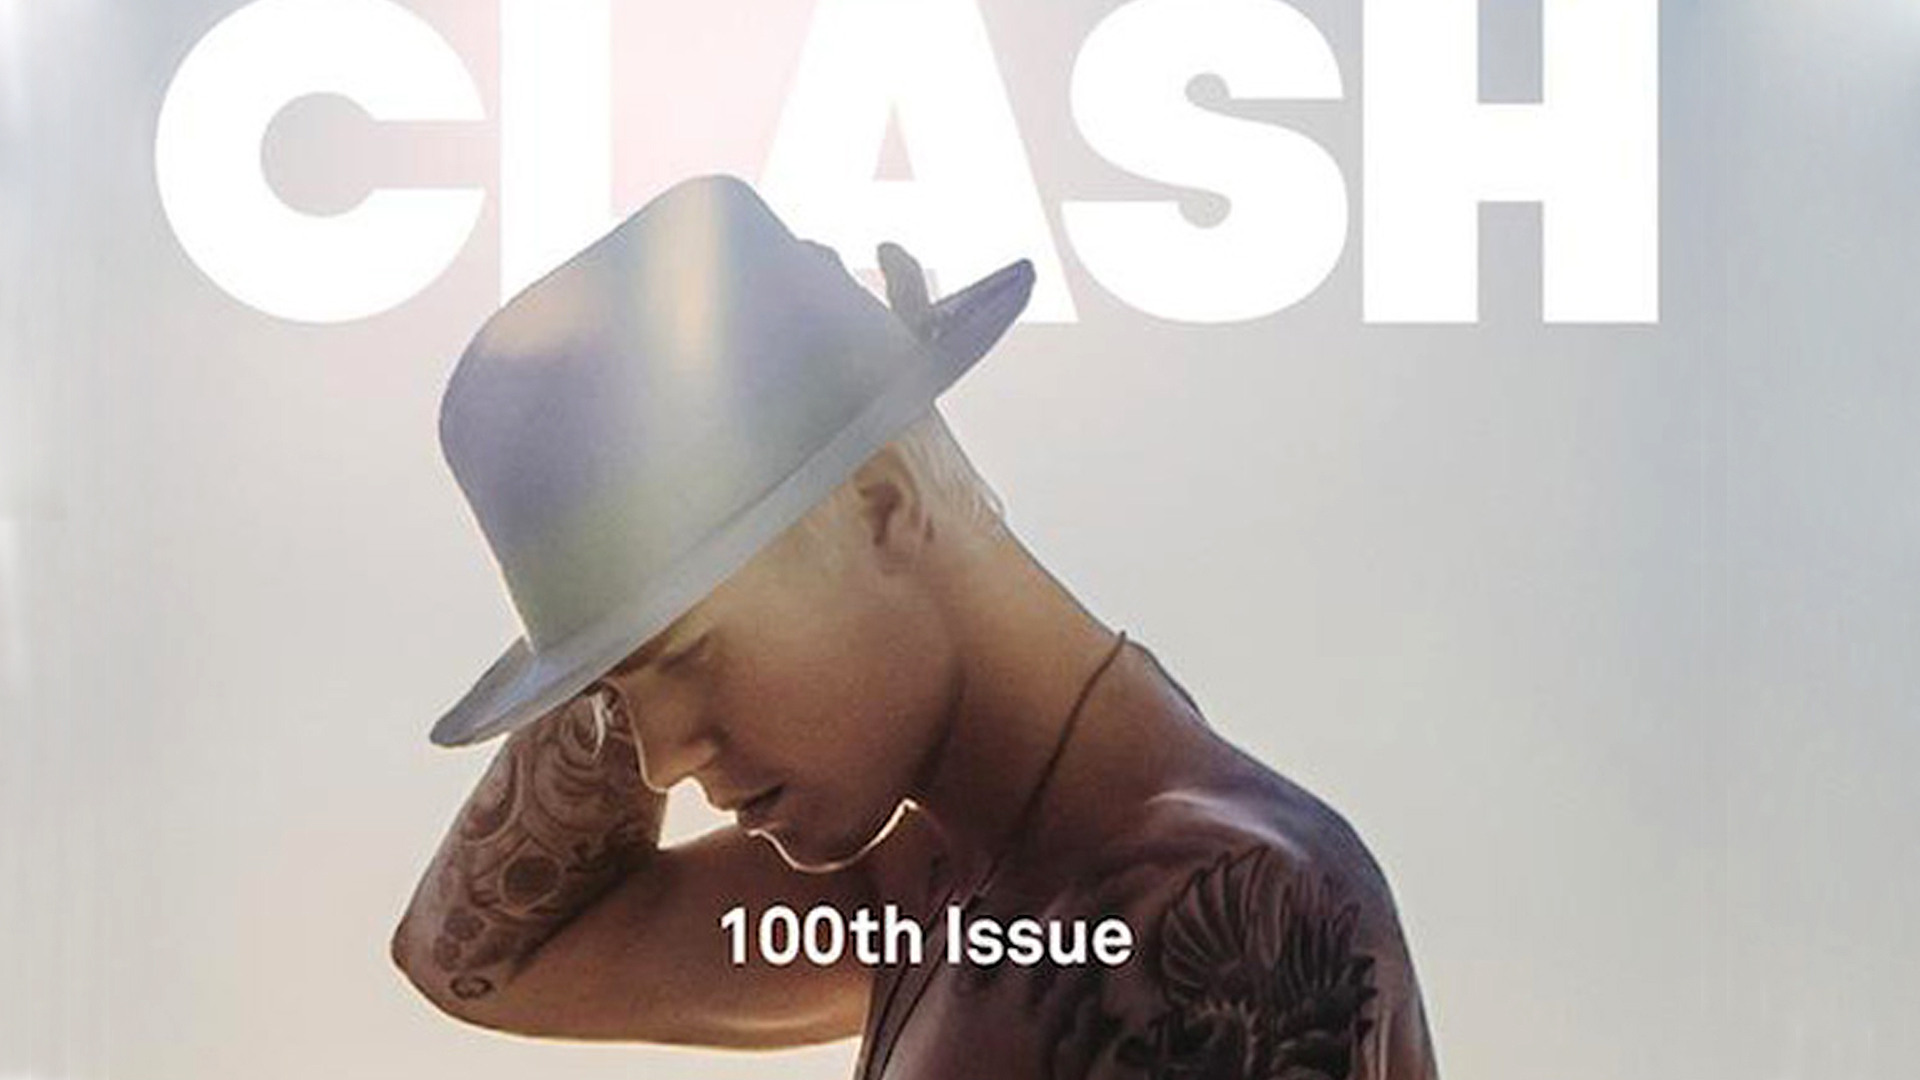 JUSTIN BIEBER GOES NAKED FOR CLASH MAGAZINE